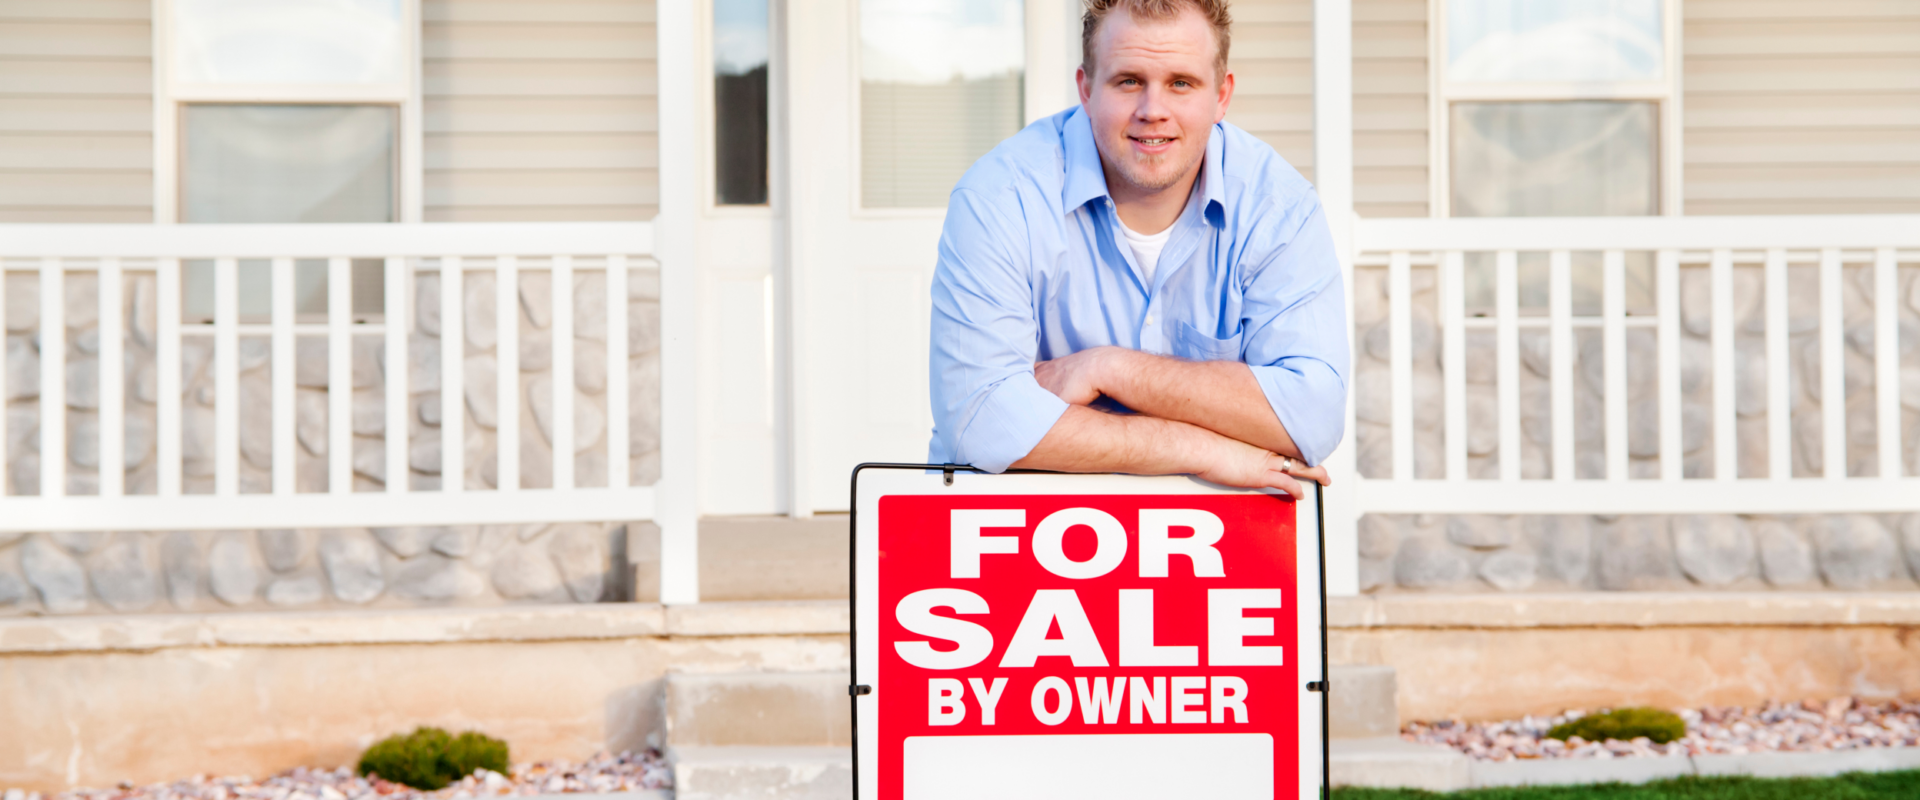 How do I sell my house by owner in Ohio?